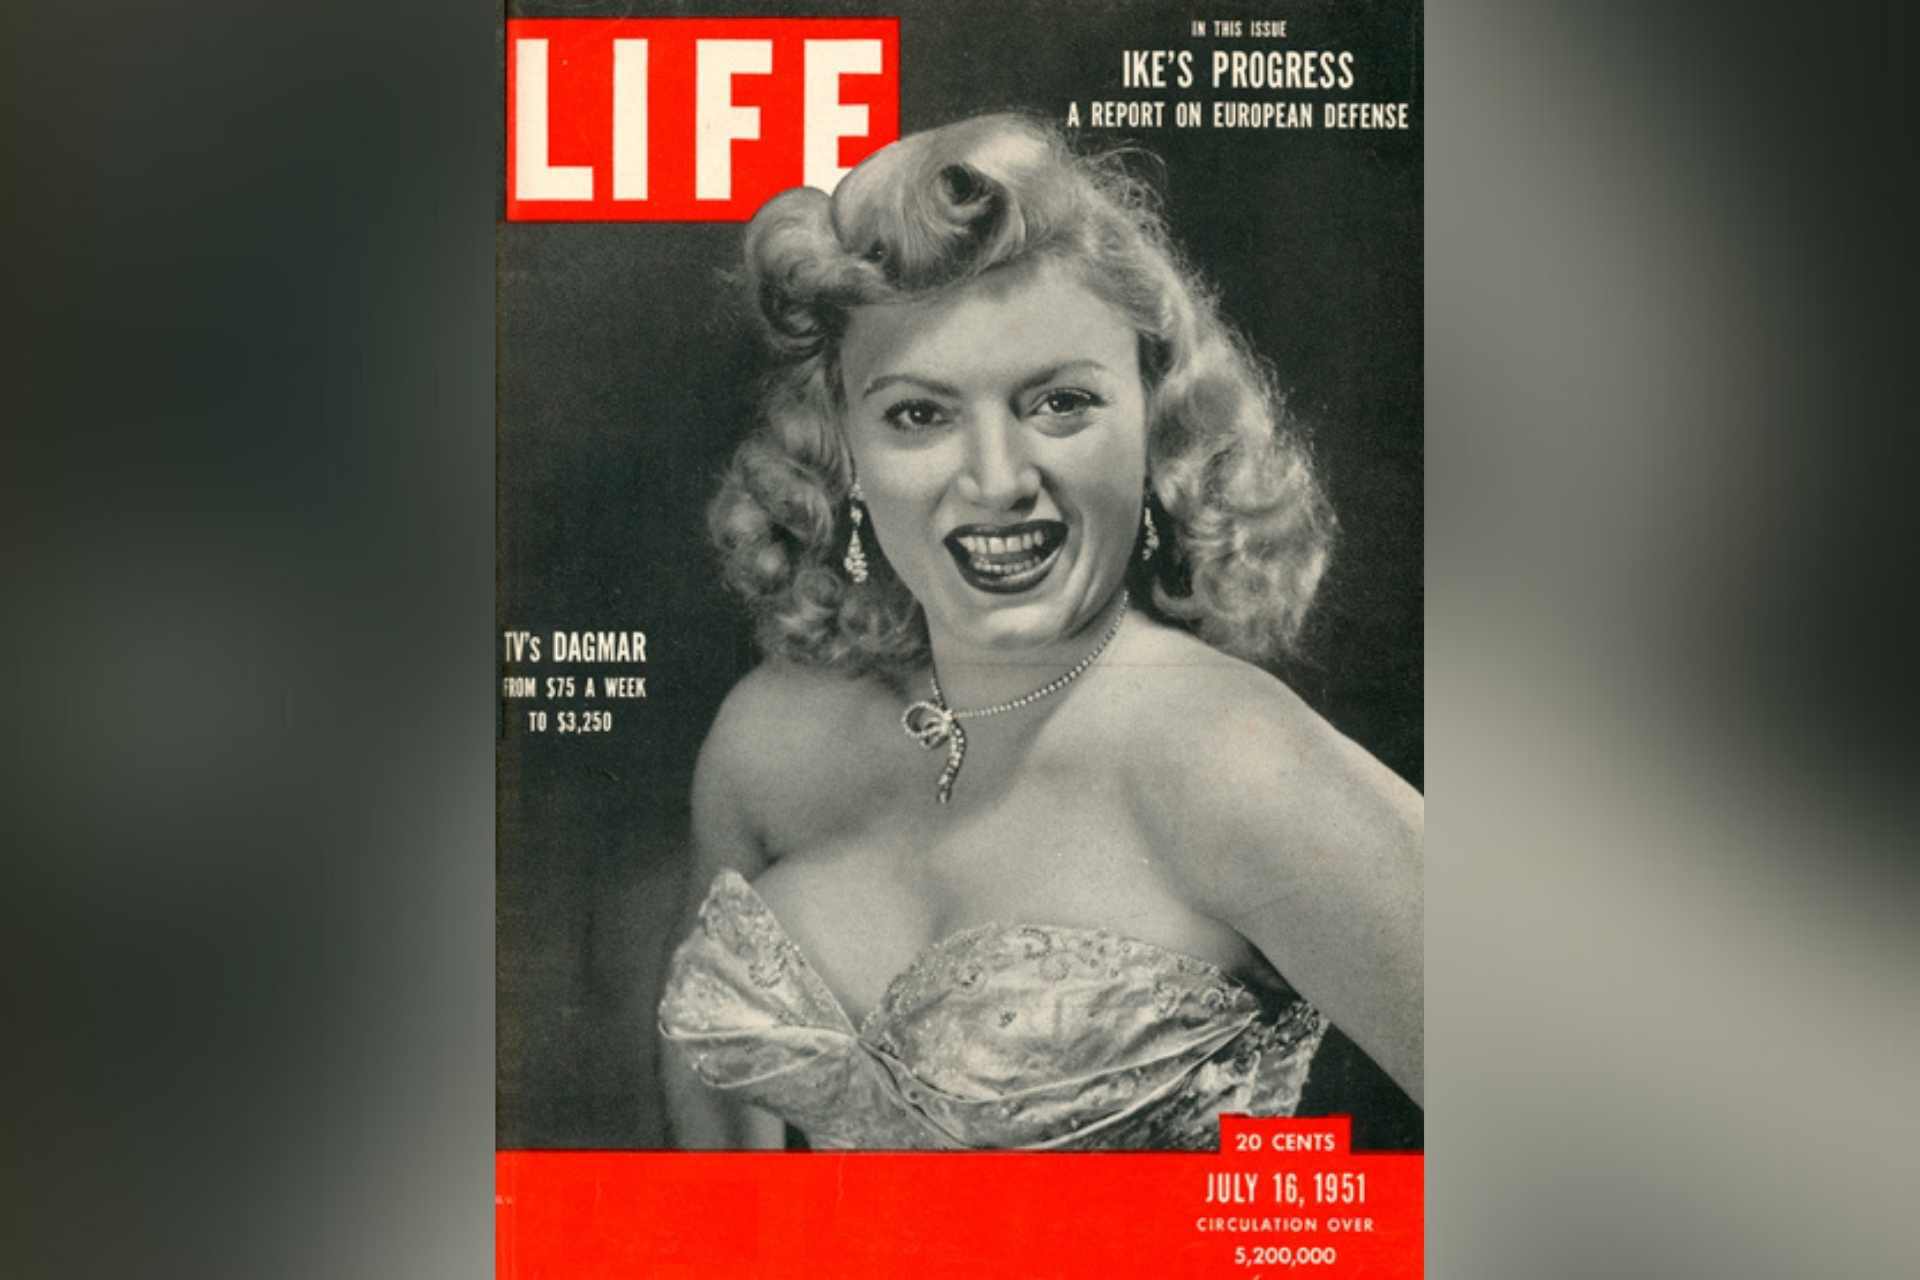 Actress Dagmar on the cover of Life.